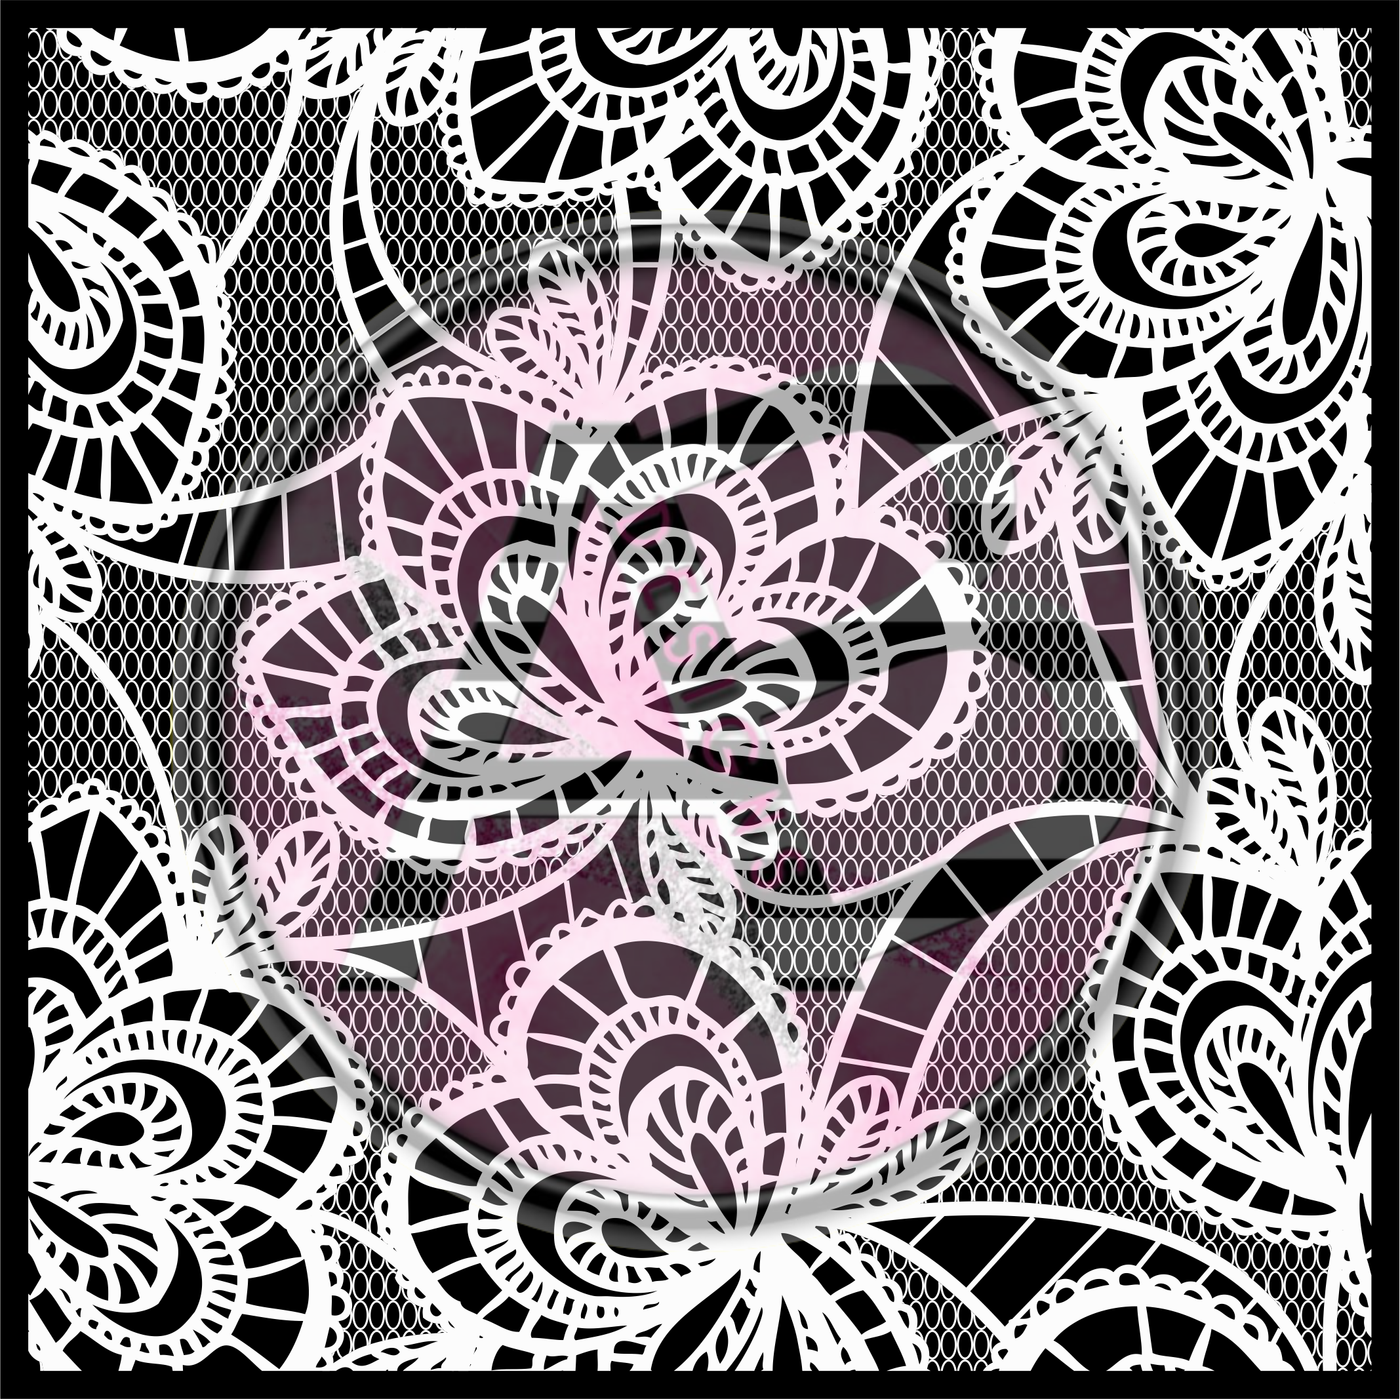 Adhesive Patterned Vinyl - White Ink Lace 07